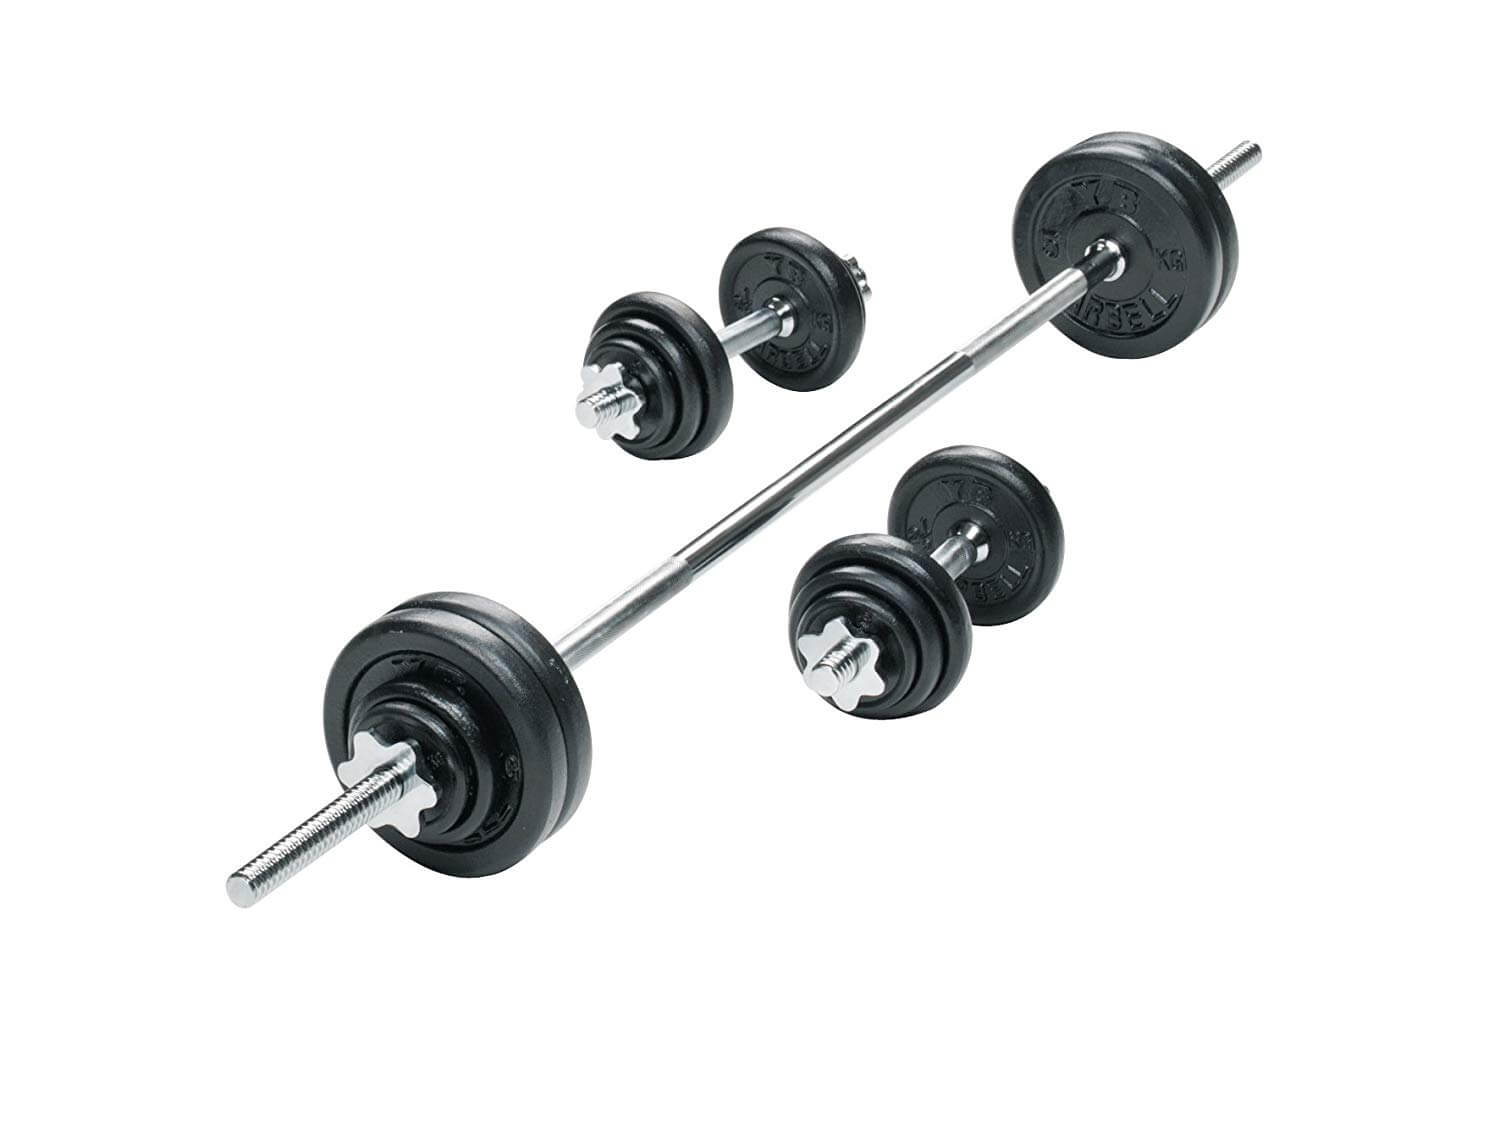 York Olympic Weight Bar Barbell Dumbbells 1" Chrome Plated Spinlock Collars Pair 